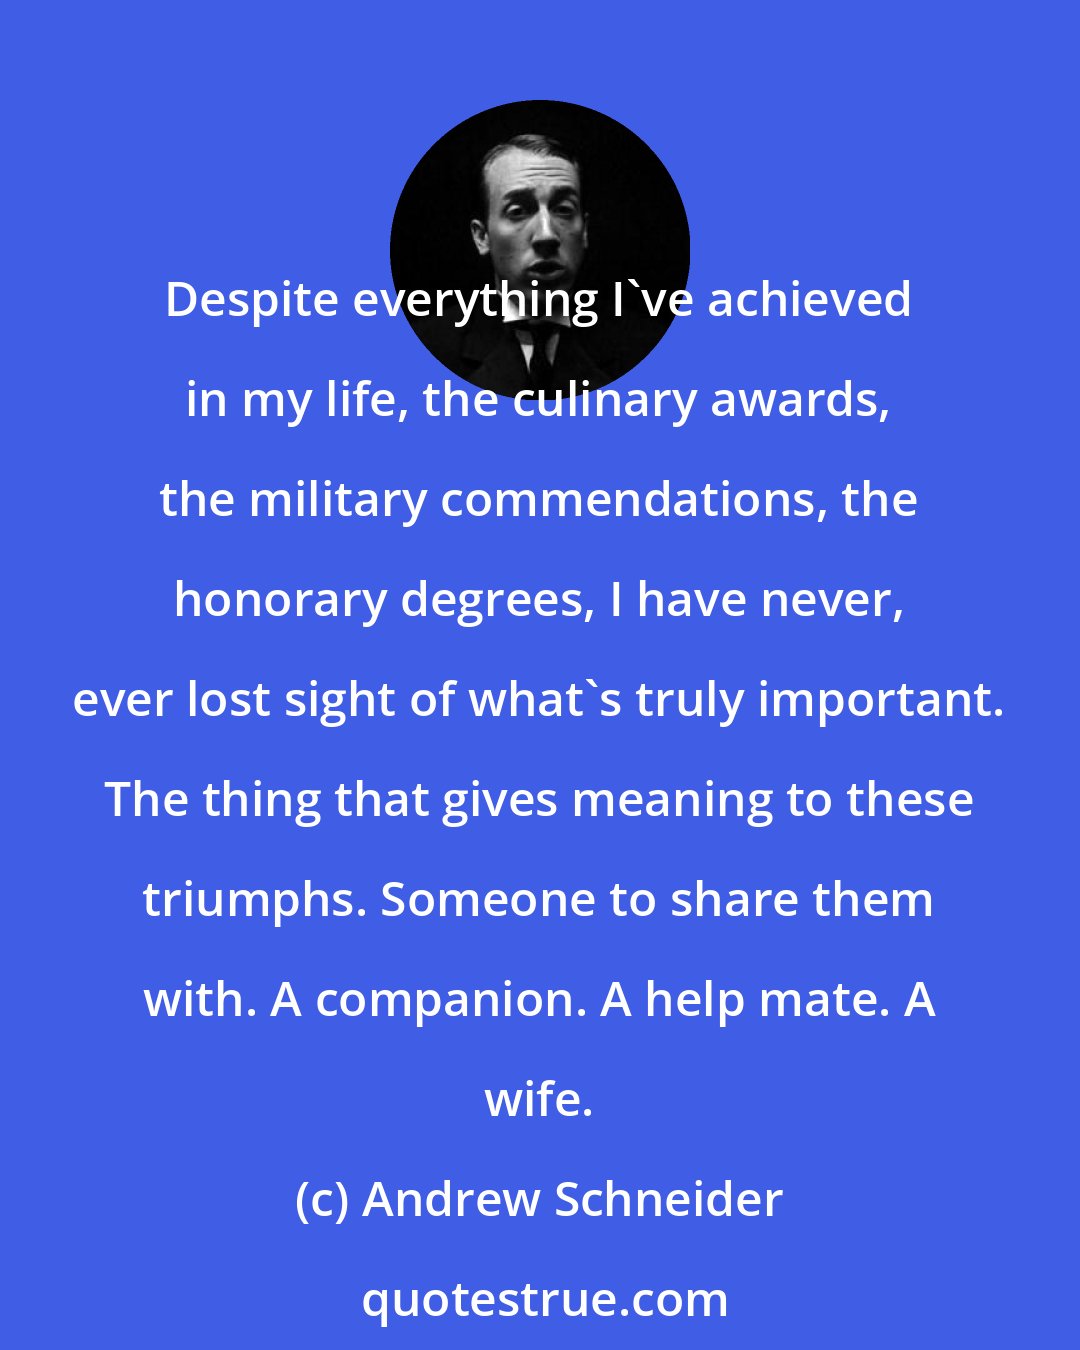 Andrew Schneider: Despite everything I've achieved in my life, the culinary awards, the military commendations, the honorary degrees, I have never, ever lost sight of what's truly important. The thing that gives meaning to these triumphs. Someone to share them with. A companion. A help mate. A wife.